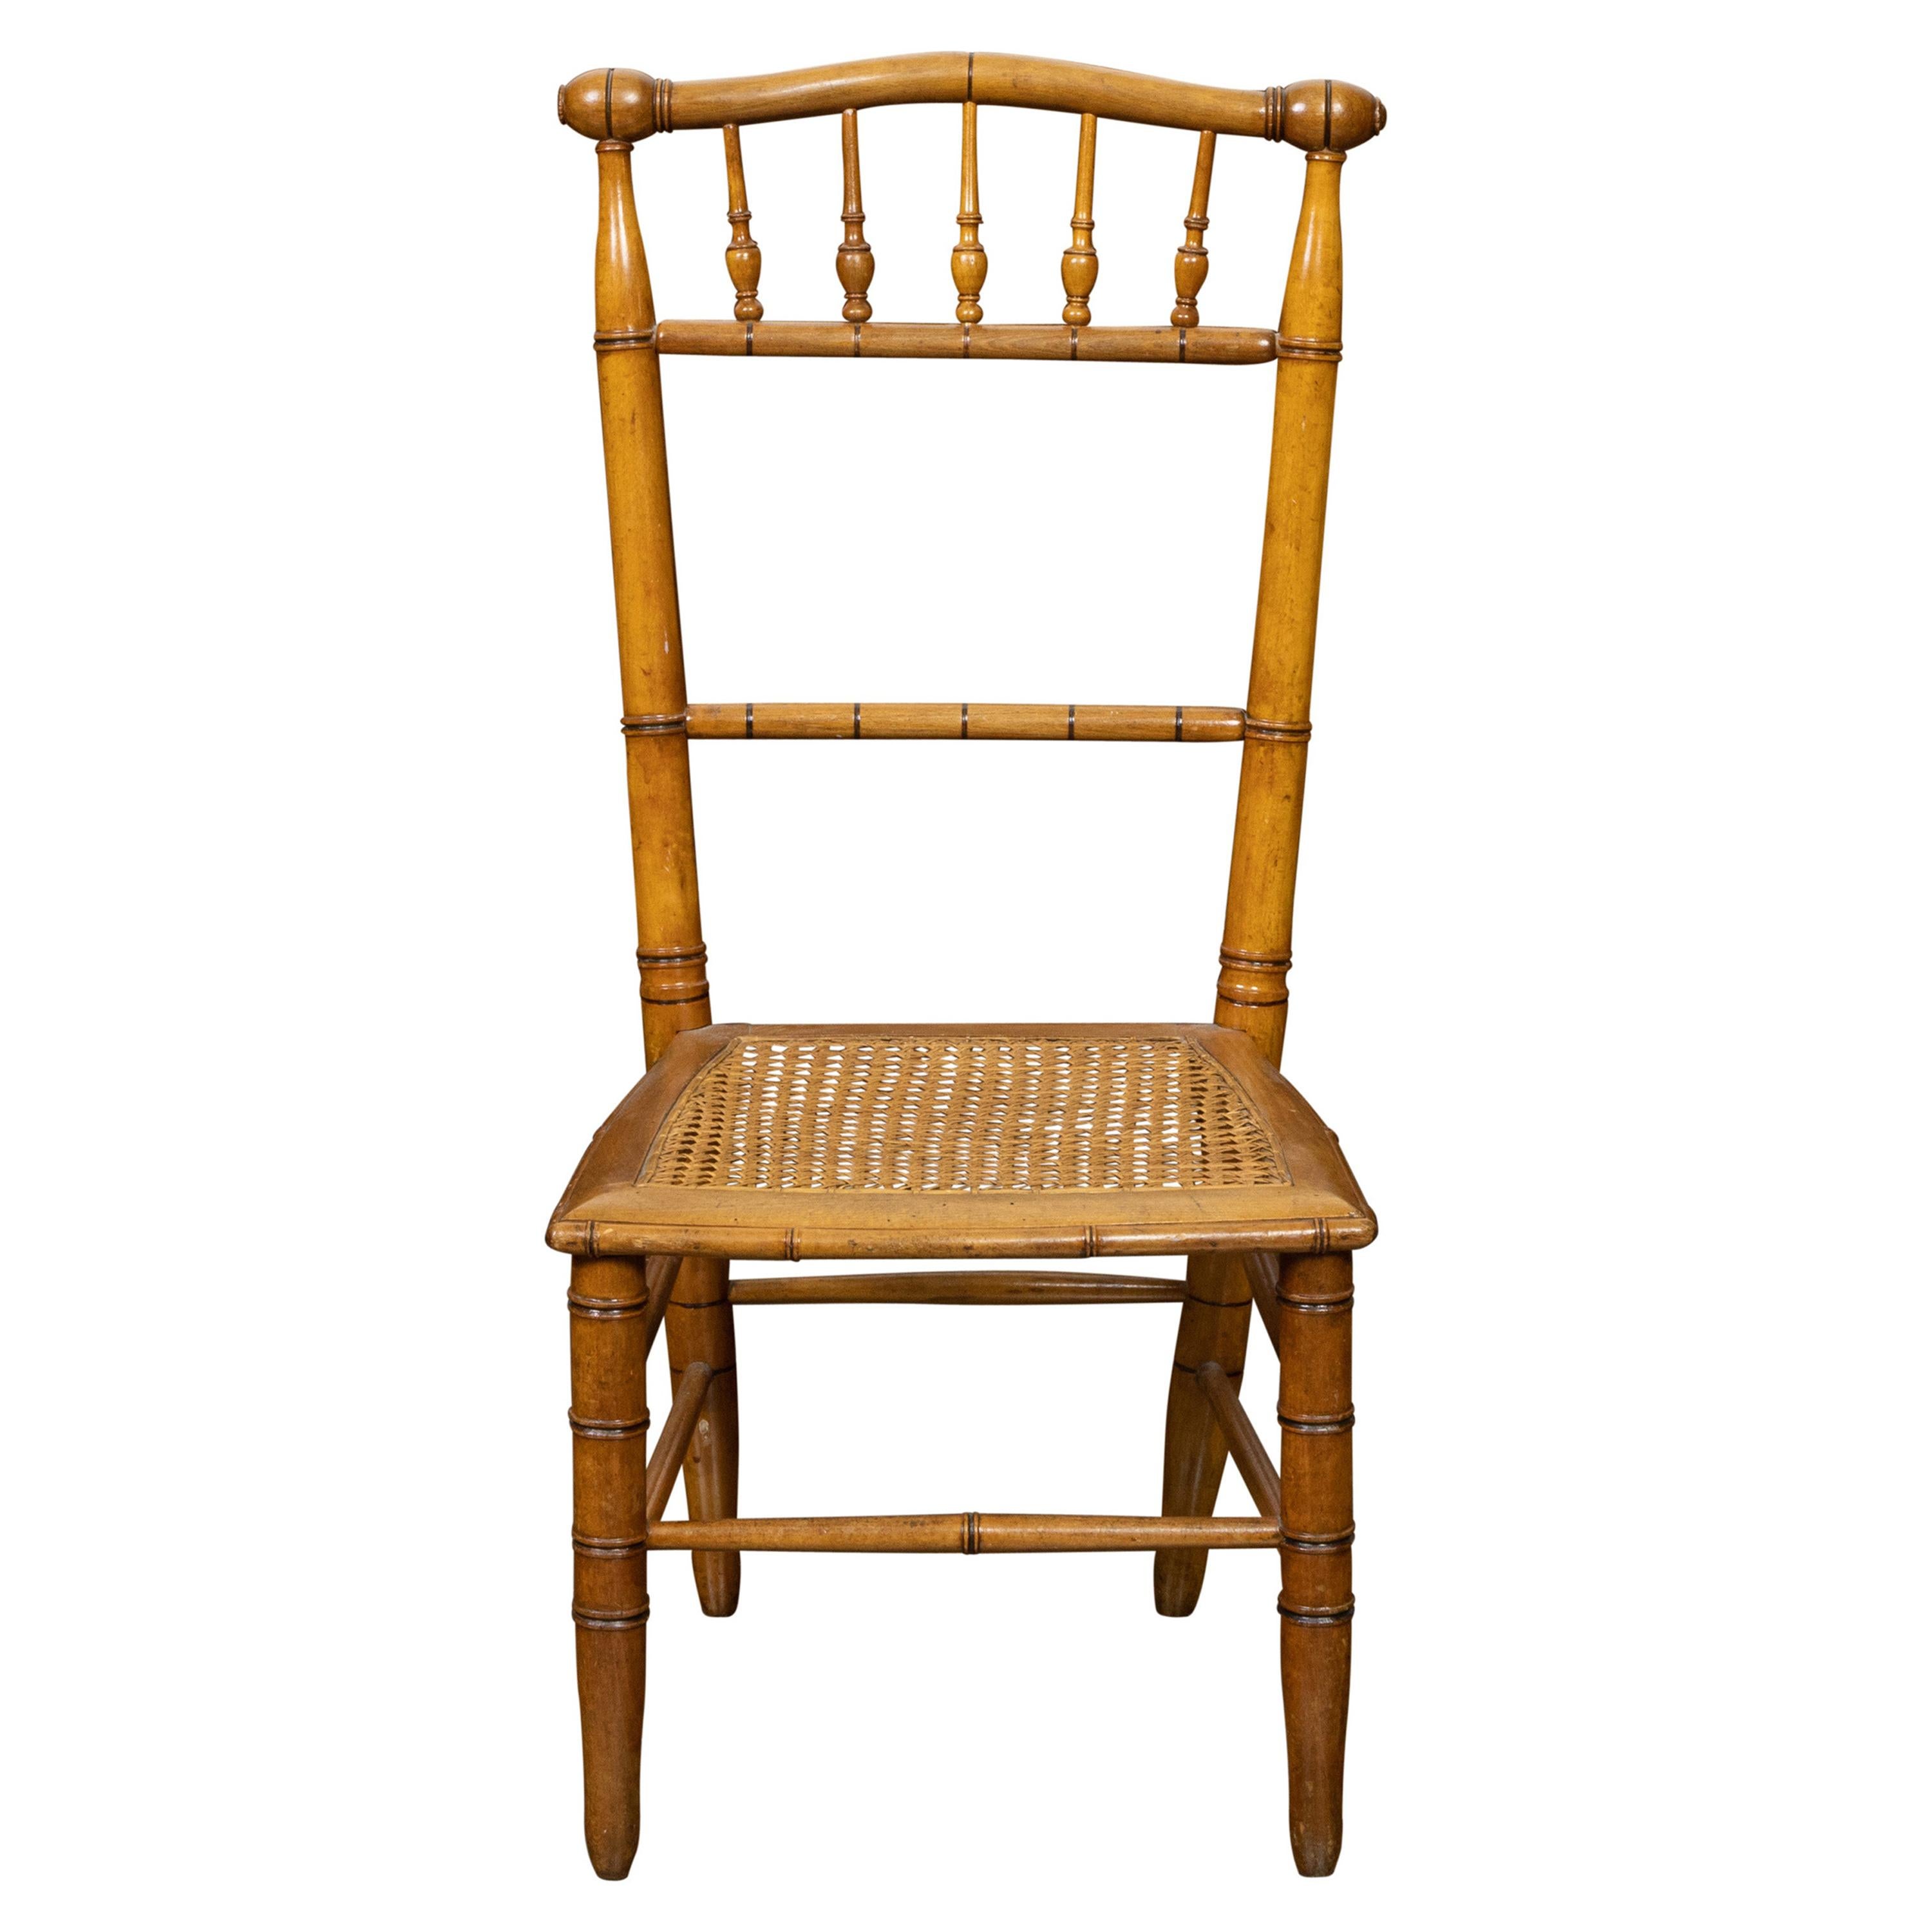 The English Turn of the Century 1900s Bamboo Slipper Chair with Cane Seat